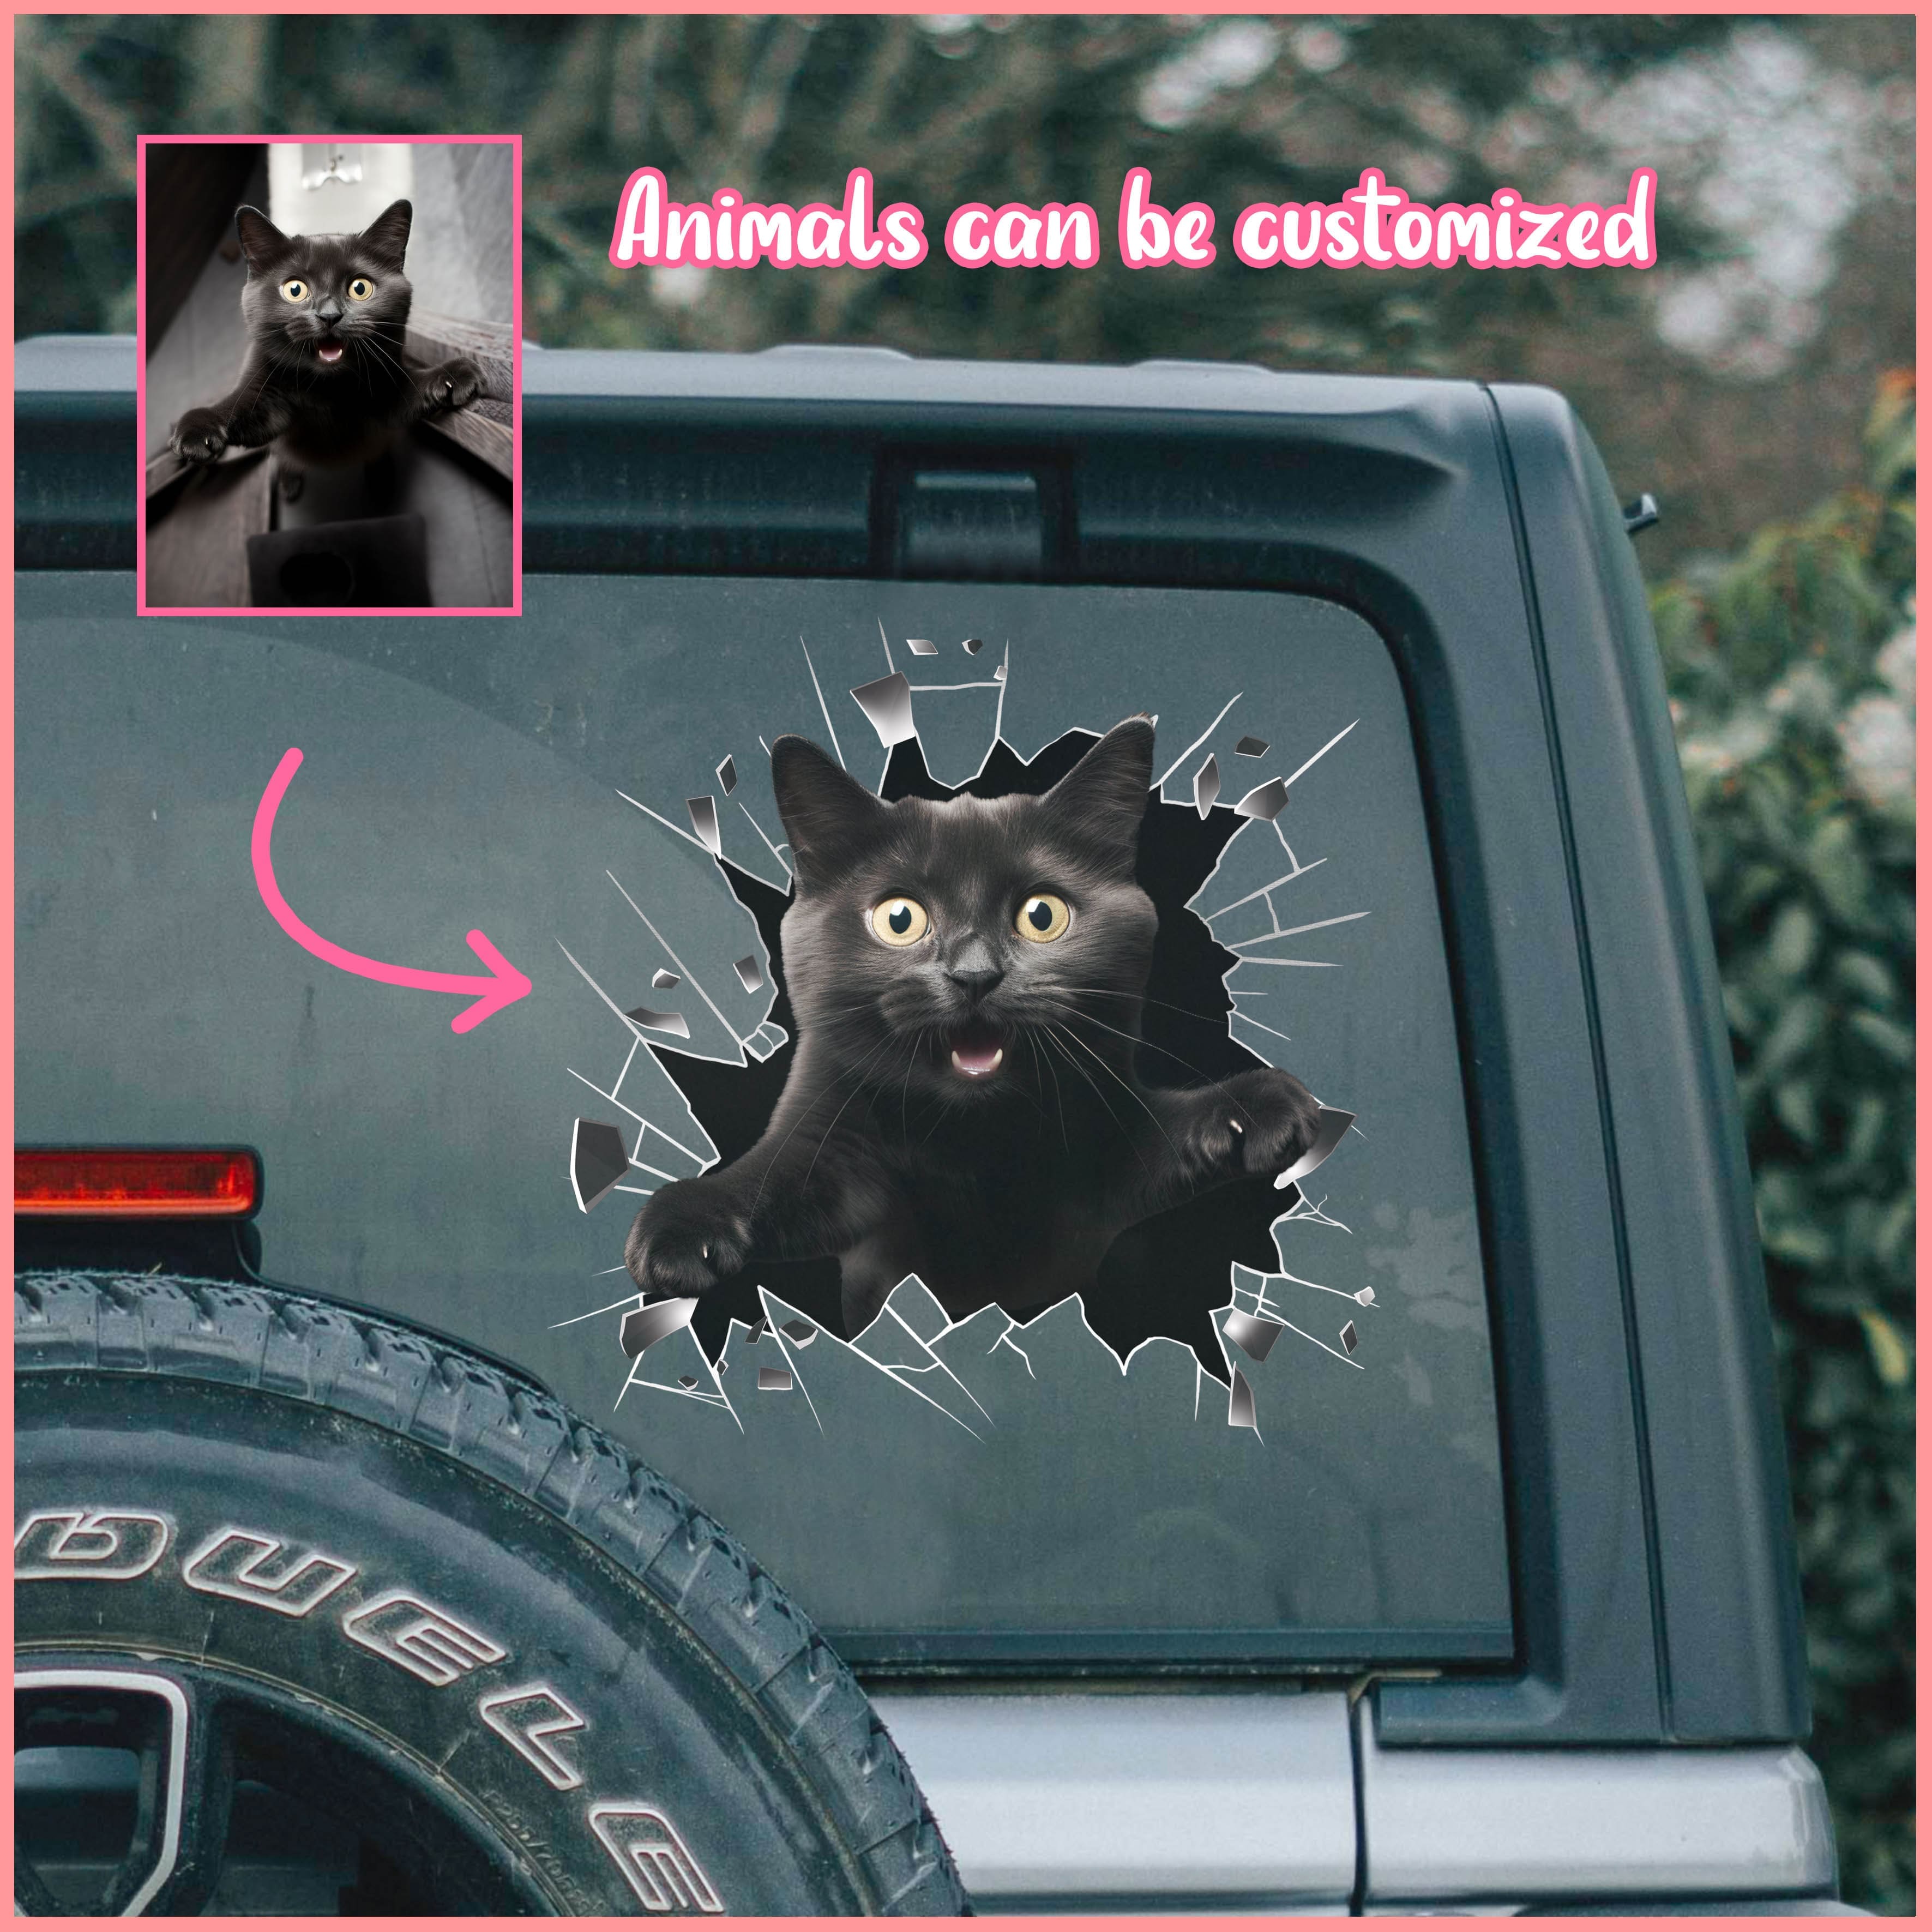 Black Cat car decal, Animals can be customized